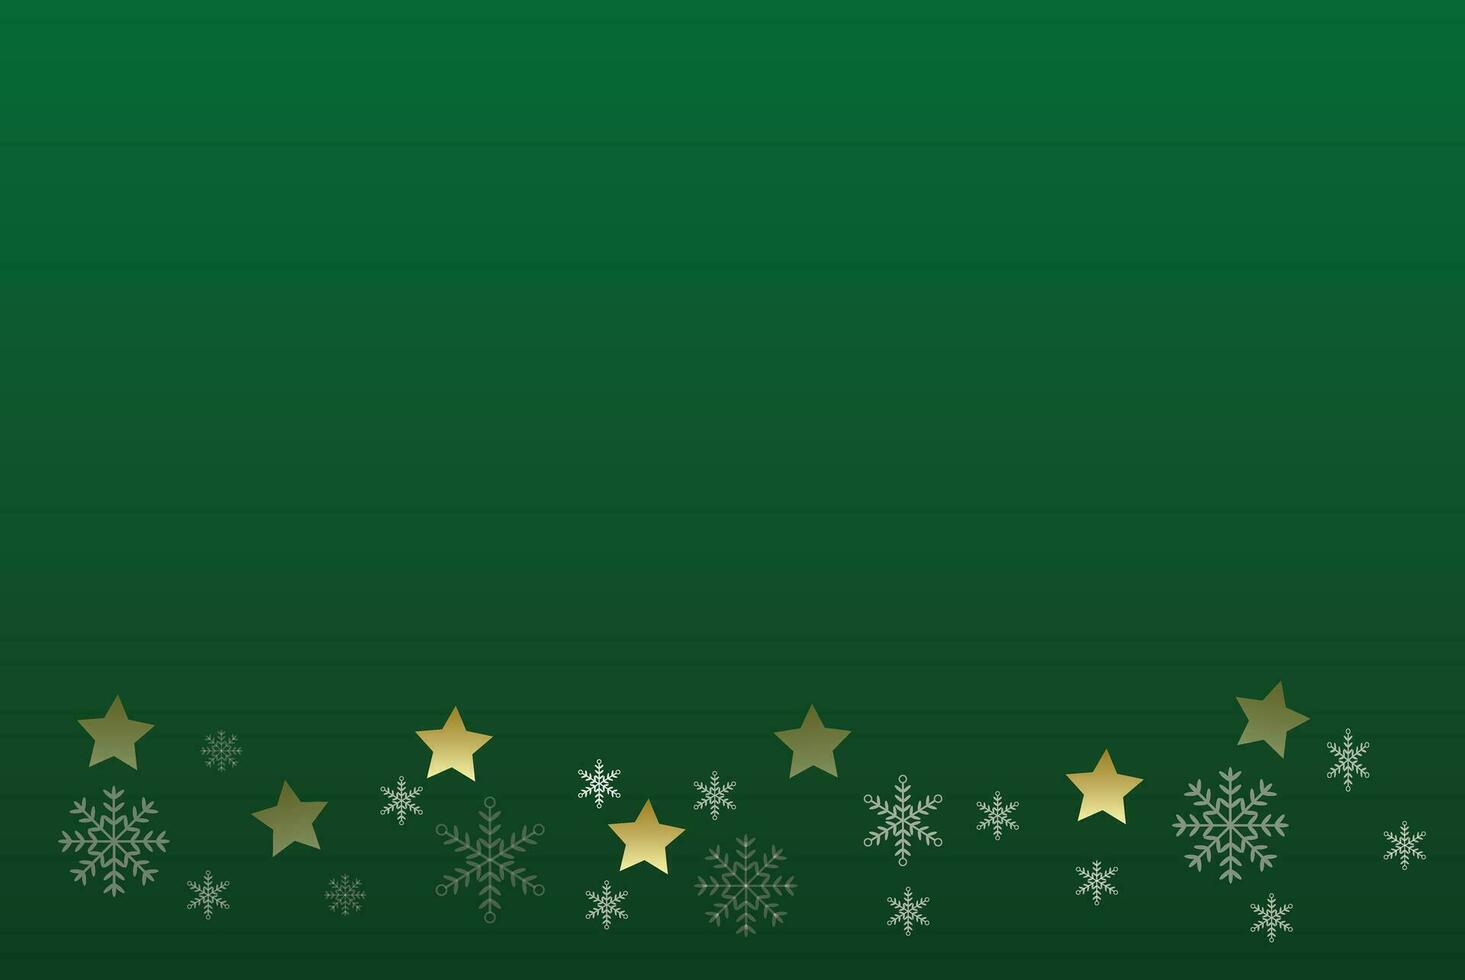 Christmas and Happy New Year with xmas snowflakes on green background, vector illustration.